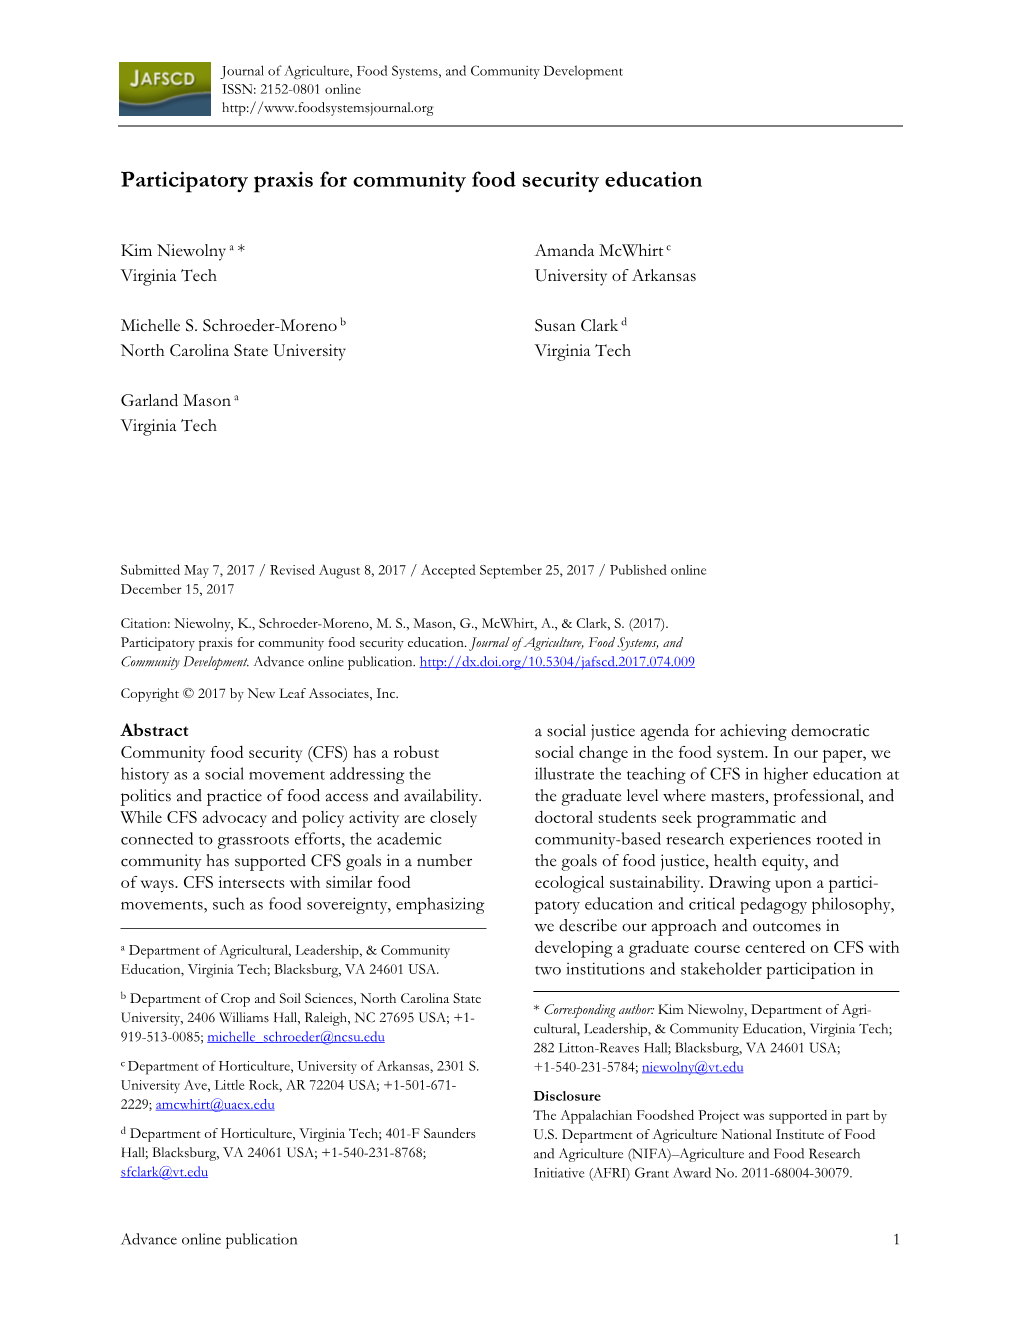 Participatory Praxis for Community Food Security Education